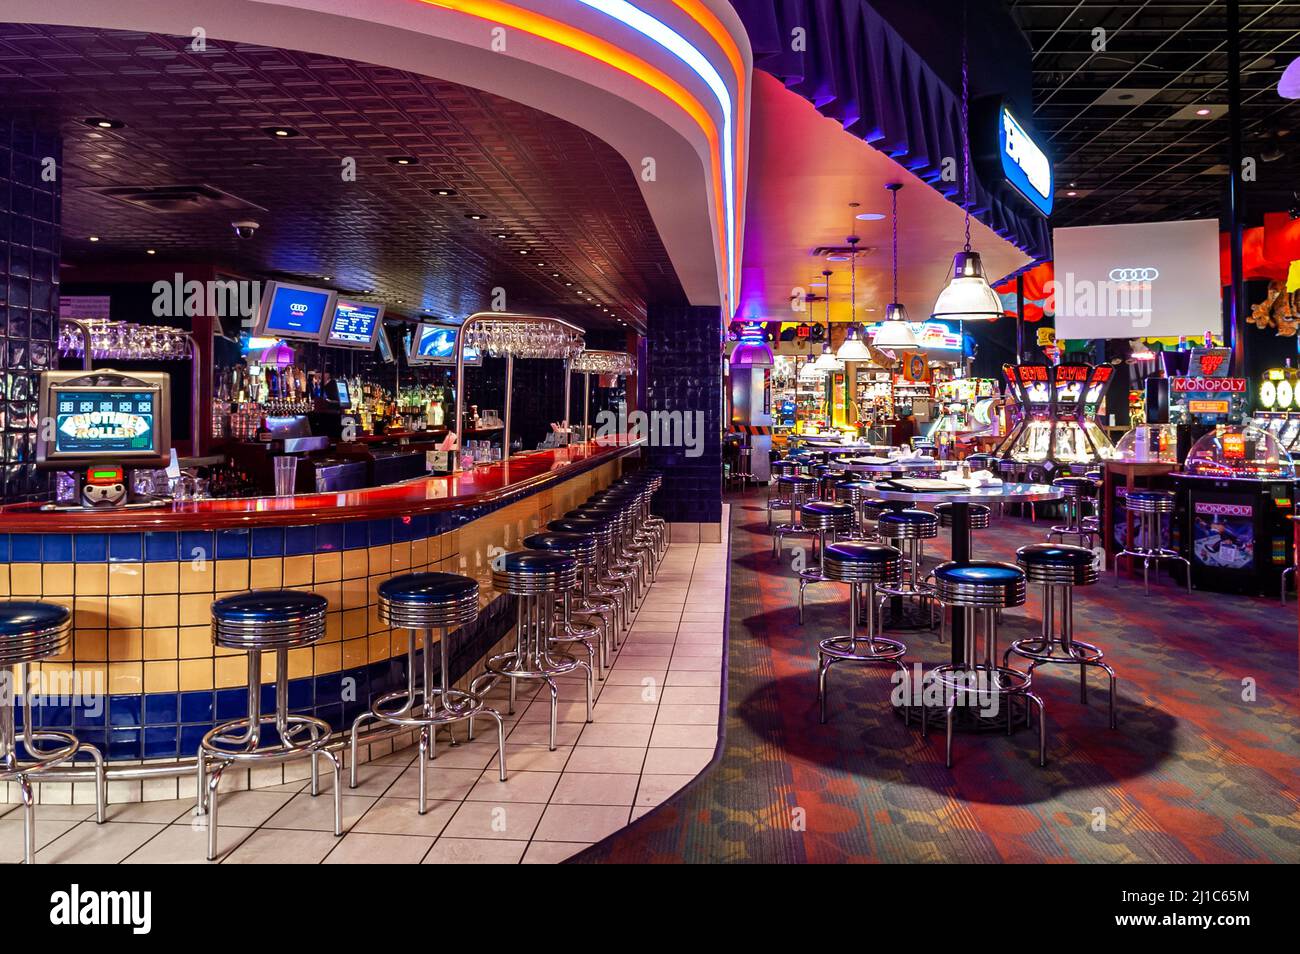 67 Dave Buster's Images, Stock Photos, 3D objects, & Vectors